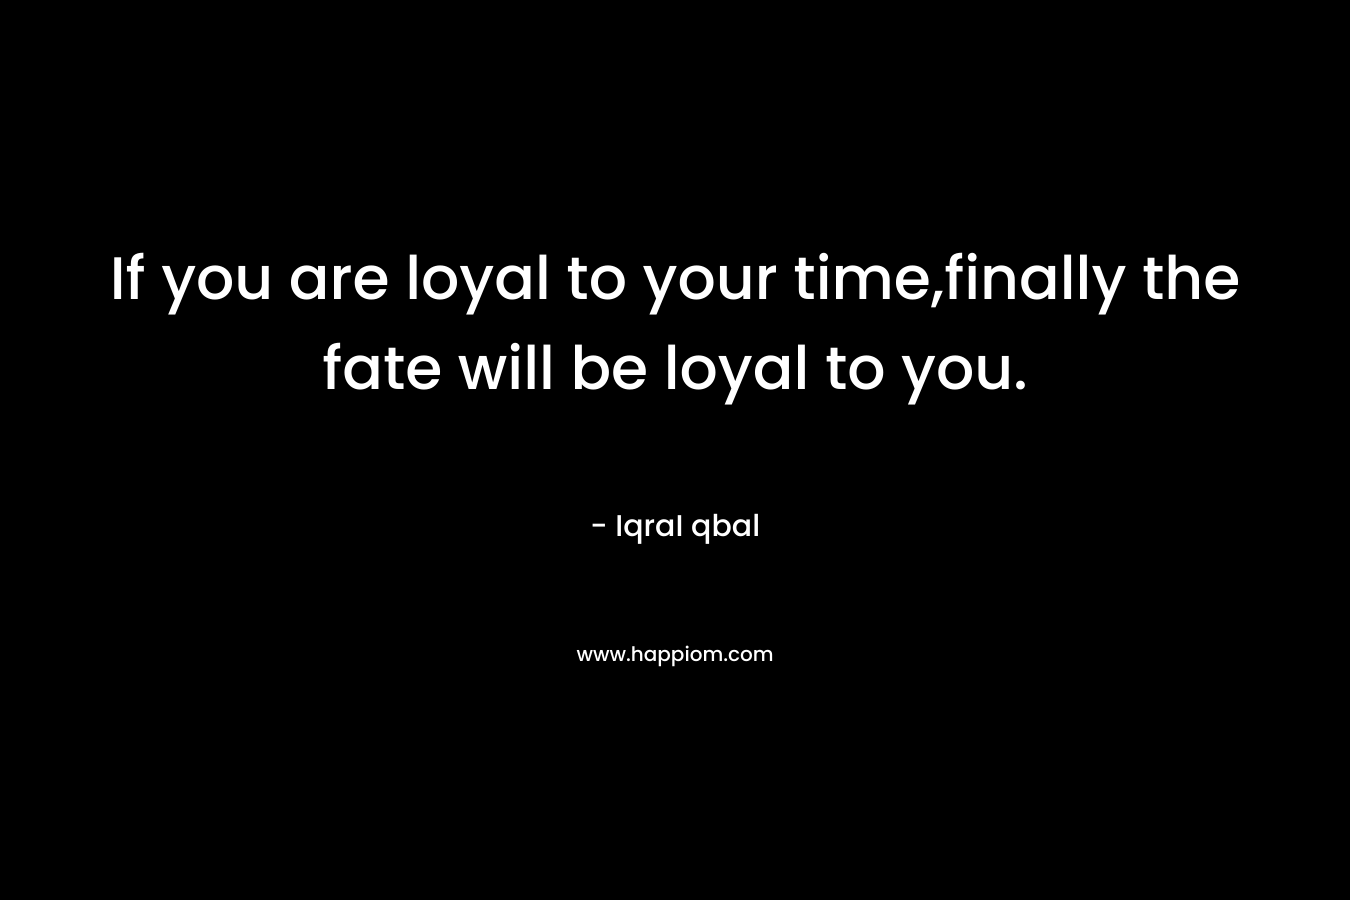 If you are loyal to your time,finally the fate will be loyal to you.